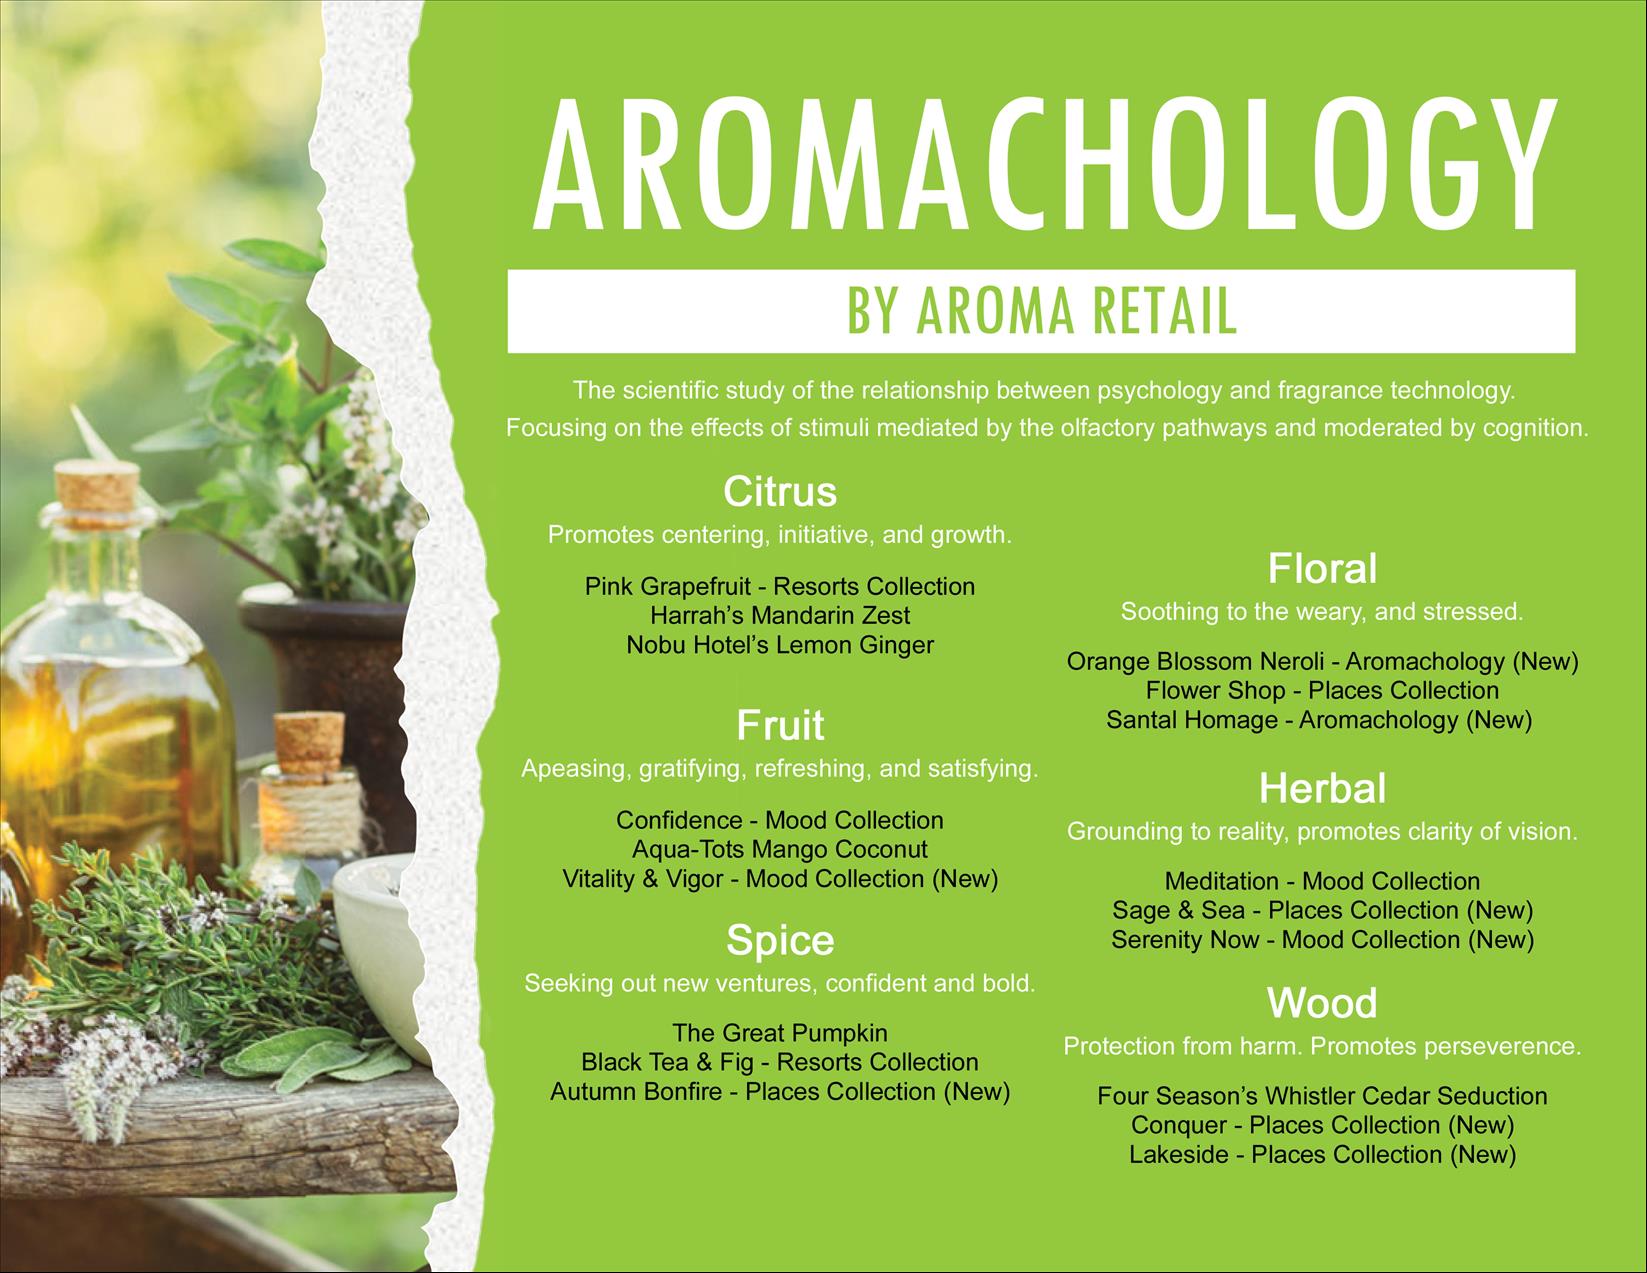 Aroma Retail Launches 15 New Scents And The Aromachology Collection, Focused On The Influence Of Odors On Human Behavior